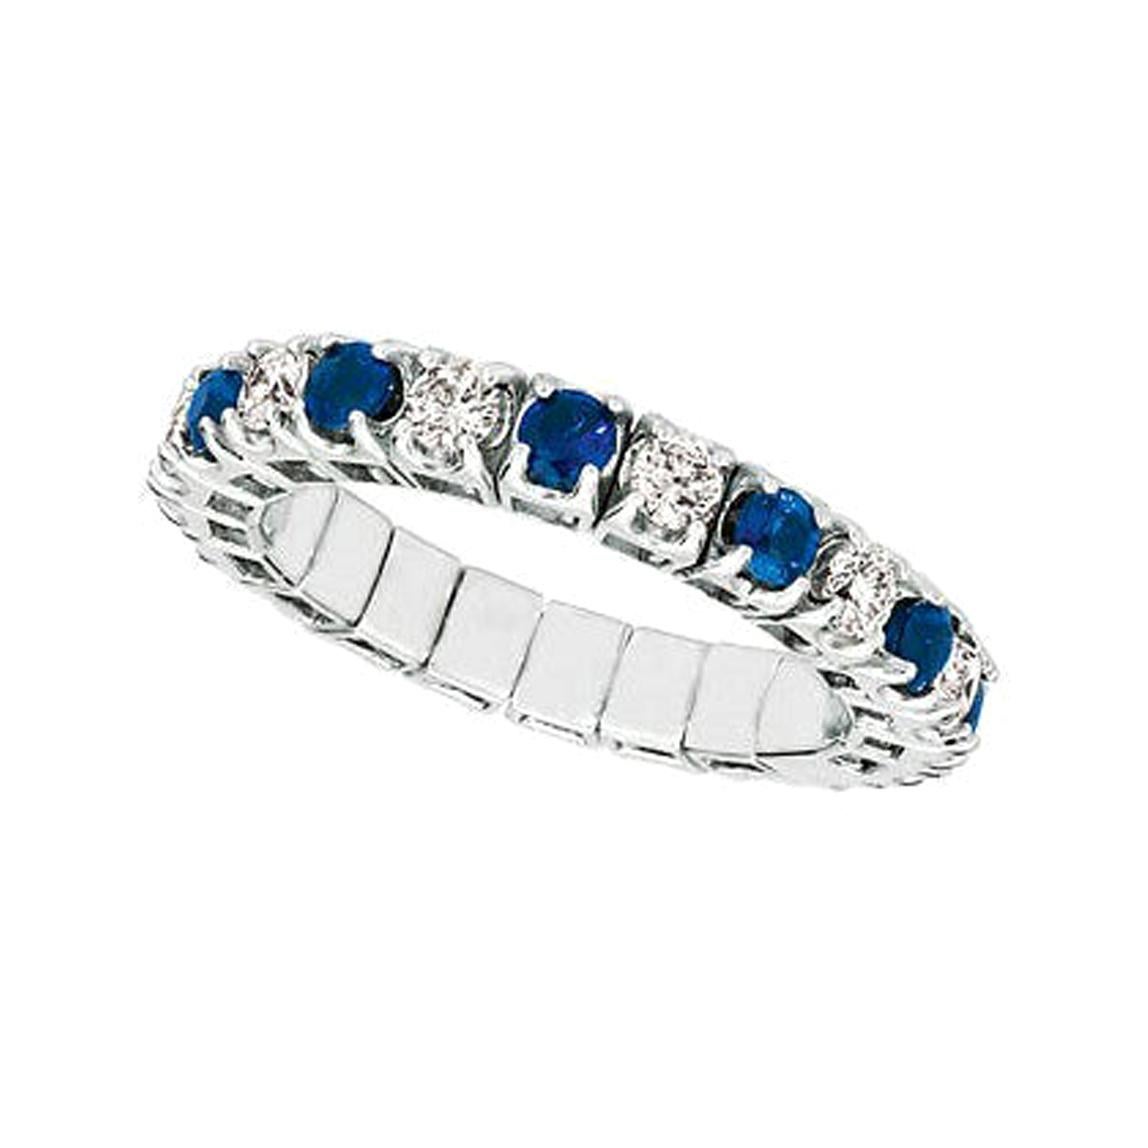 For Sale:  1.76 Carat Natural Diamond & Sapphire Stretch Eternity Band Ring 14k White Gold